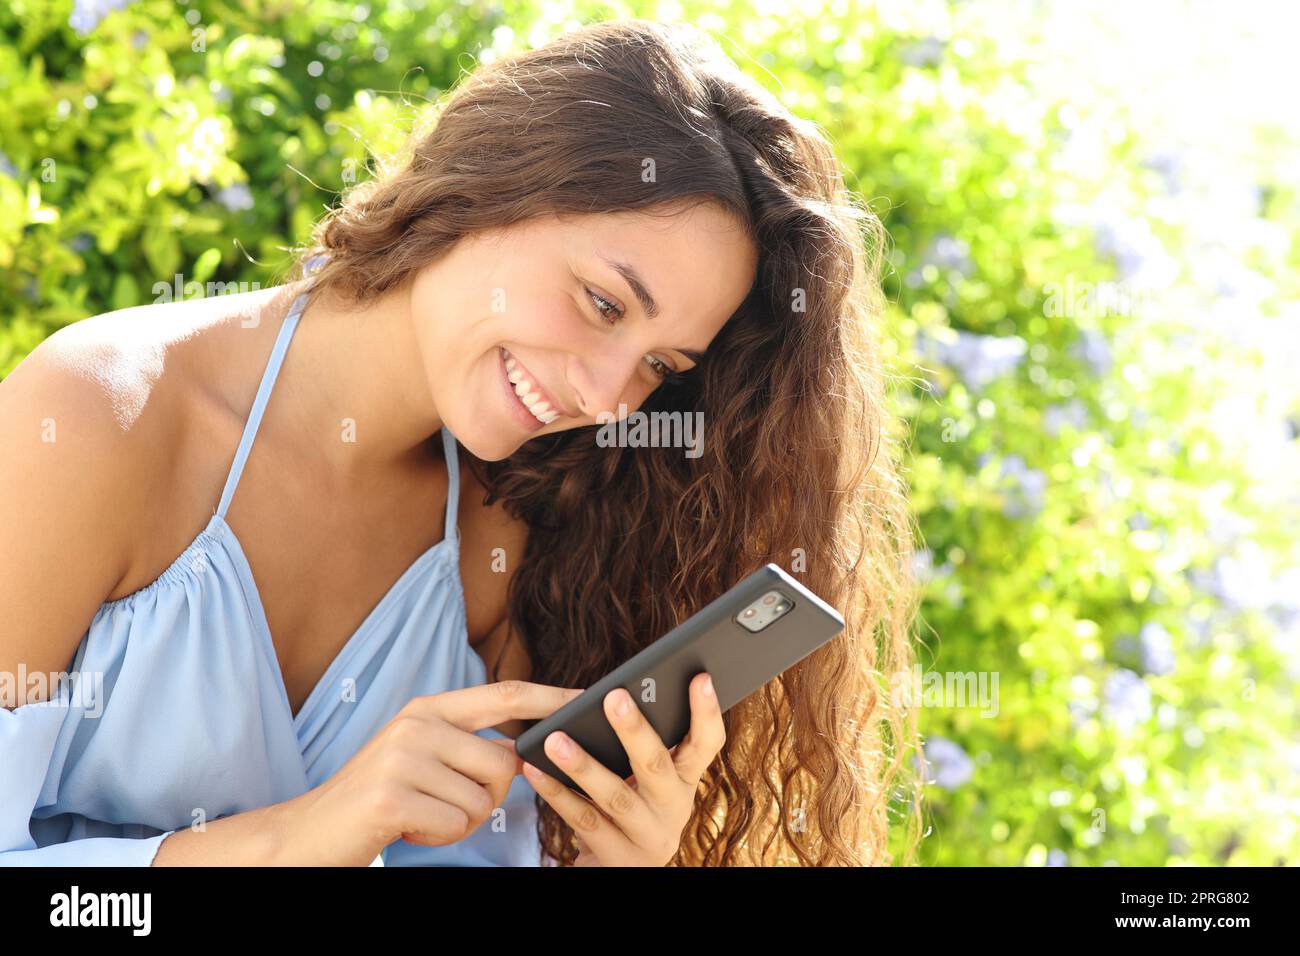 Happy woman in a garden using phone Stock Photo